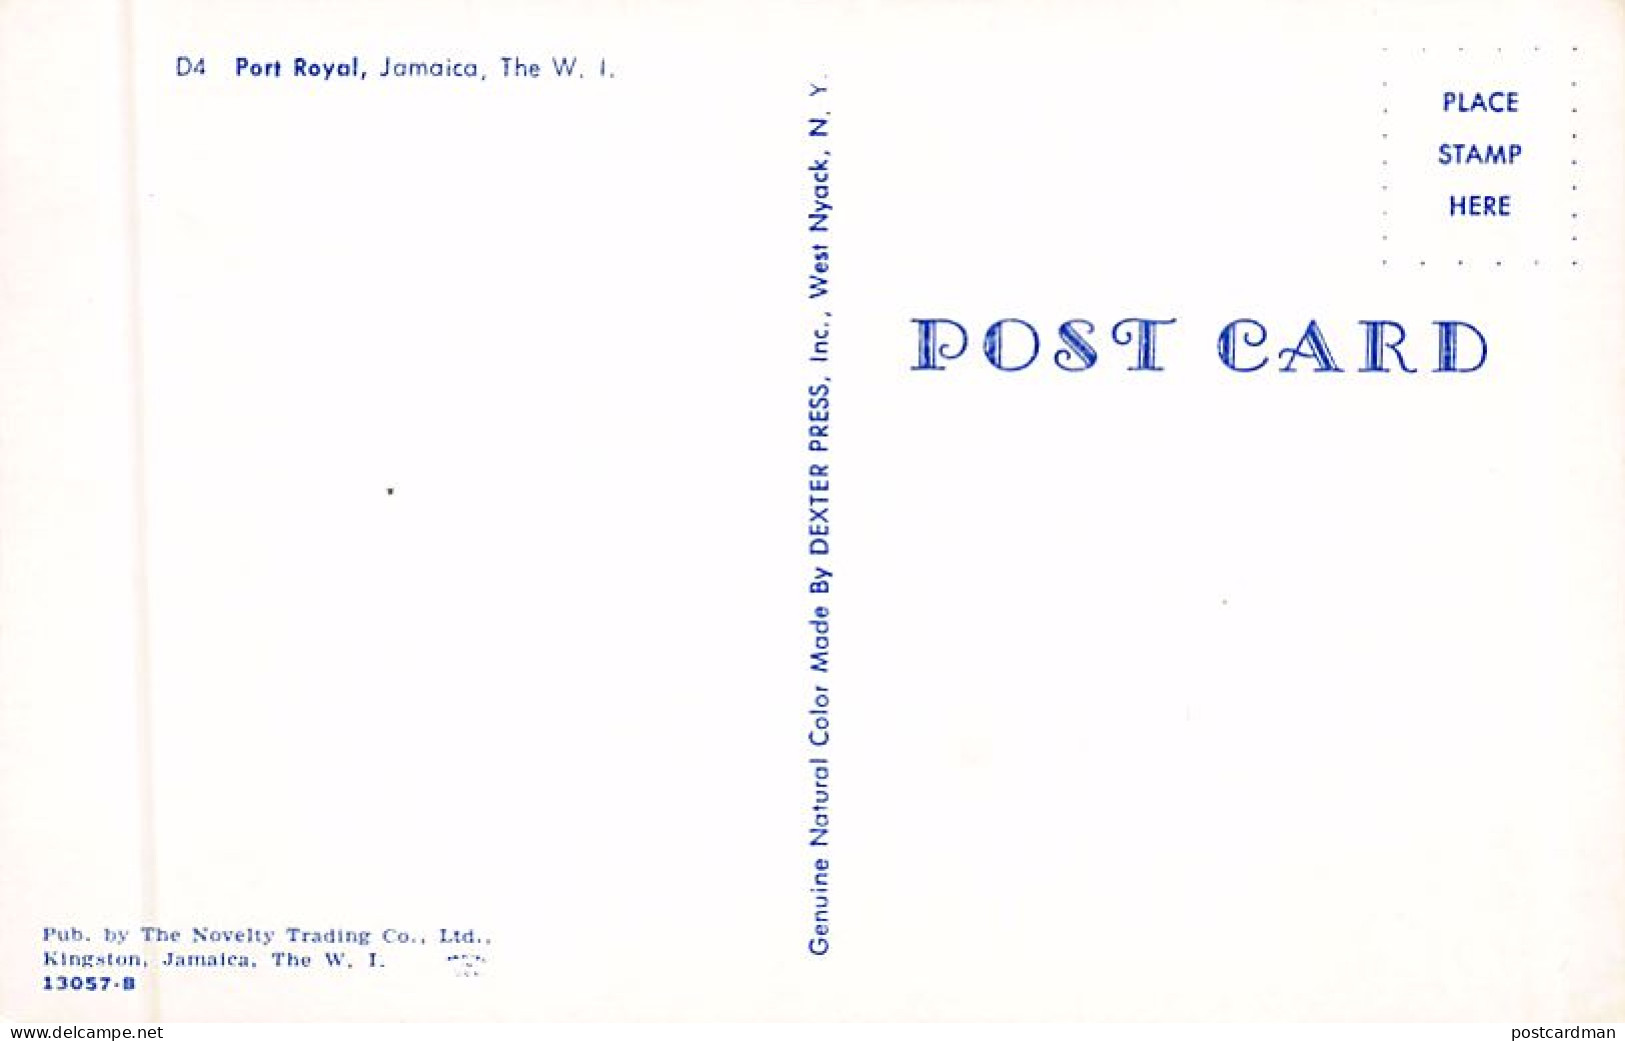 Jamaica - Port Royal - Publ. The Novelty Trading Co. 13057 - Jamaica